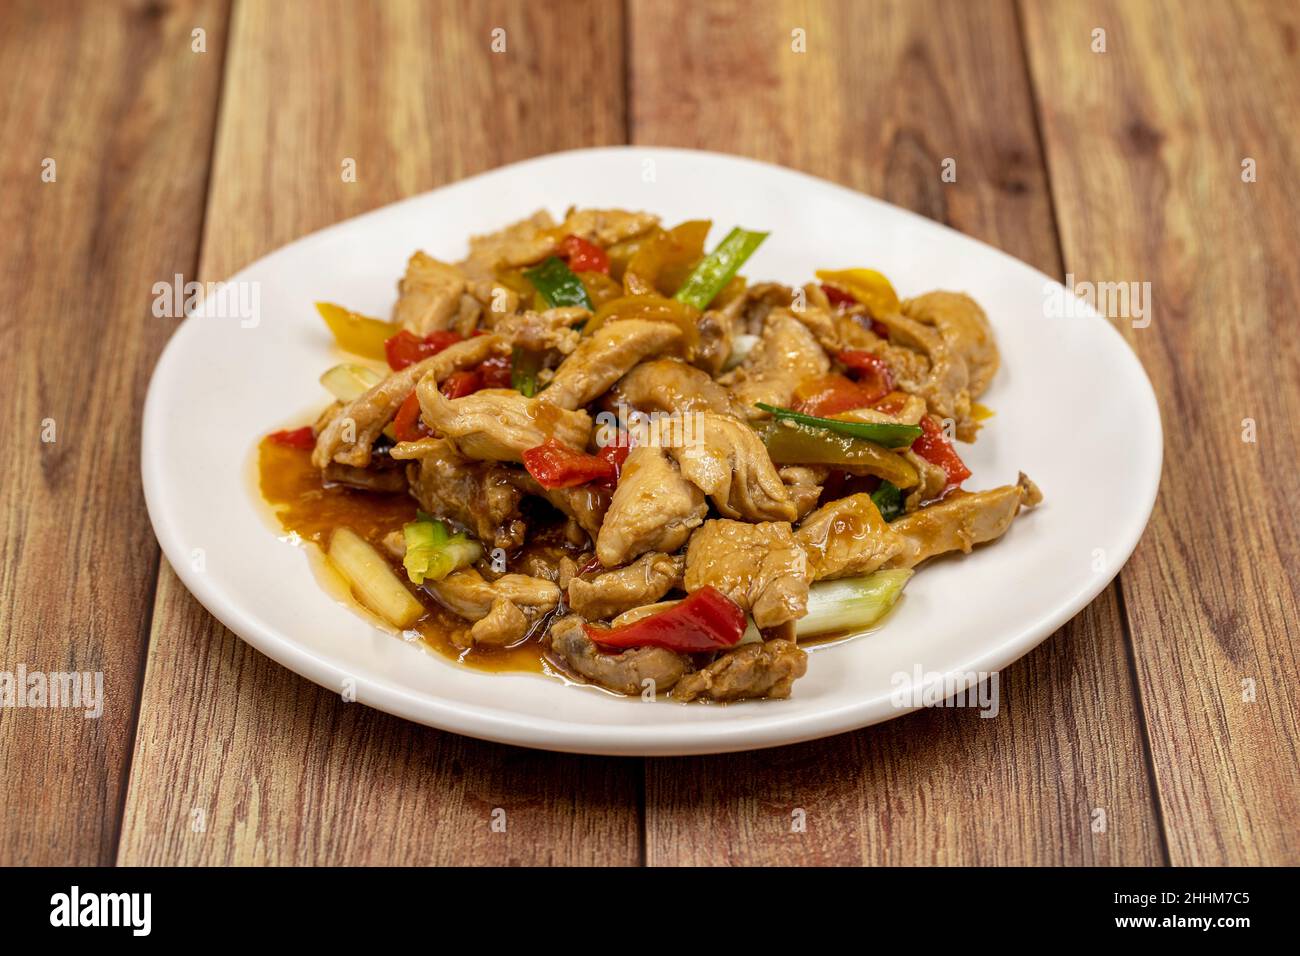 Chinese chicken dish. Chicken with olive oil and soy sauce. Traditional Chinese dish prepared with garlic, onion, capia pepper and green pepper Stock Photo